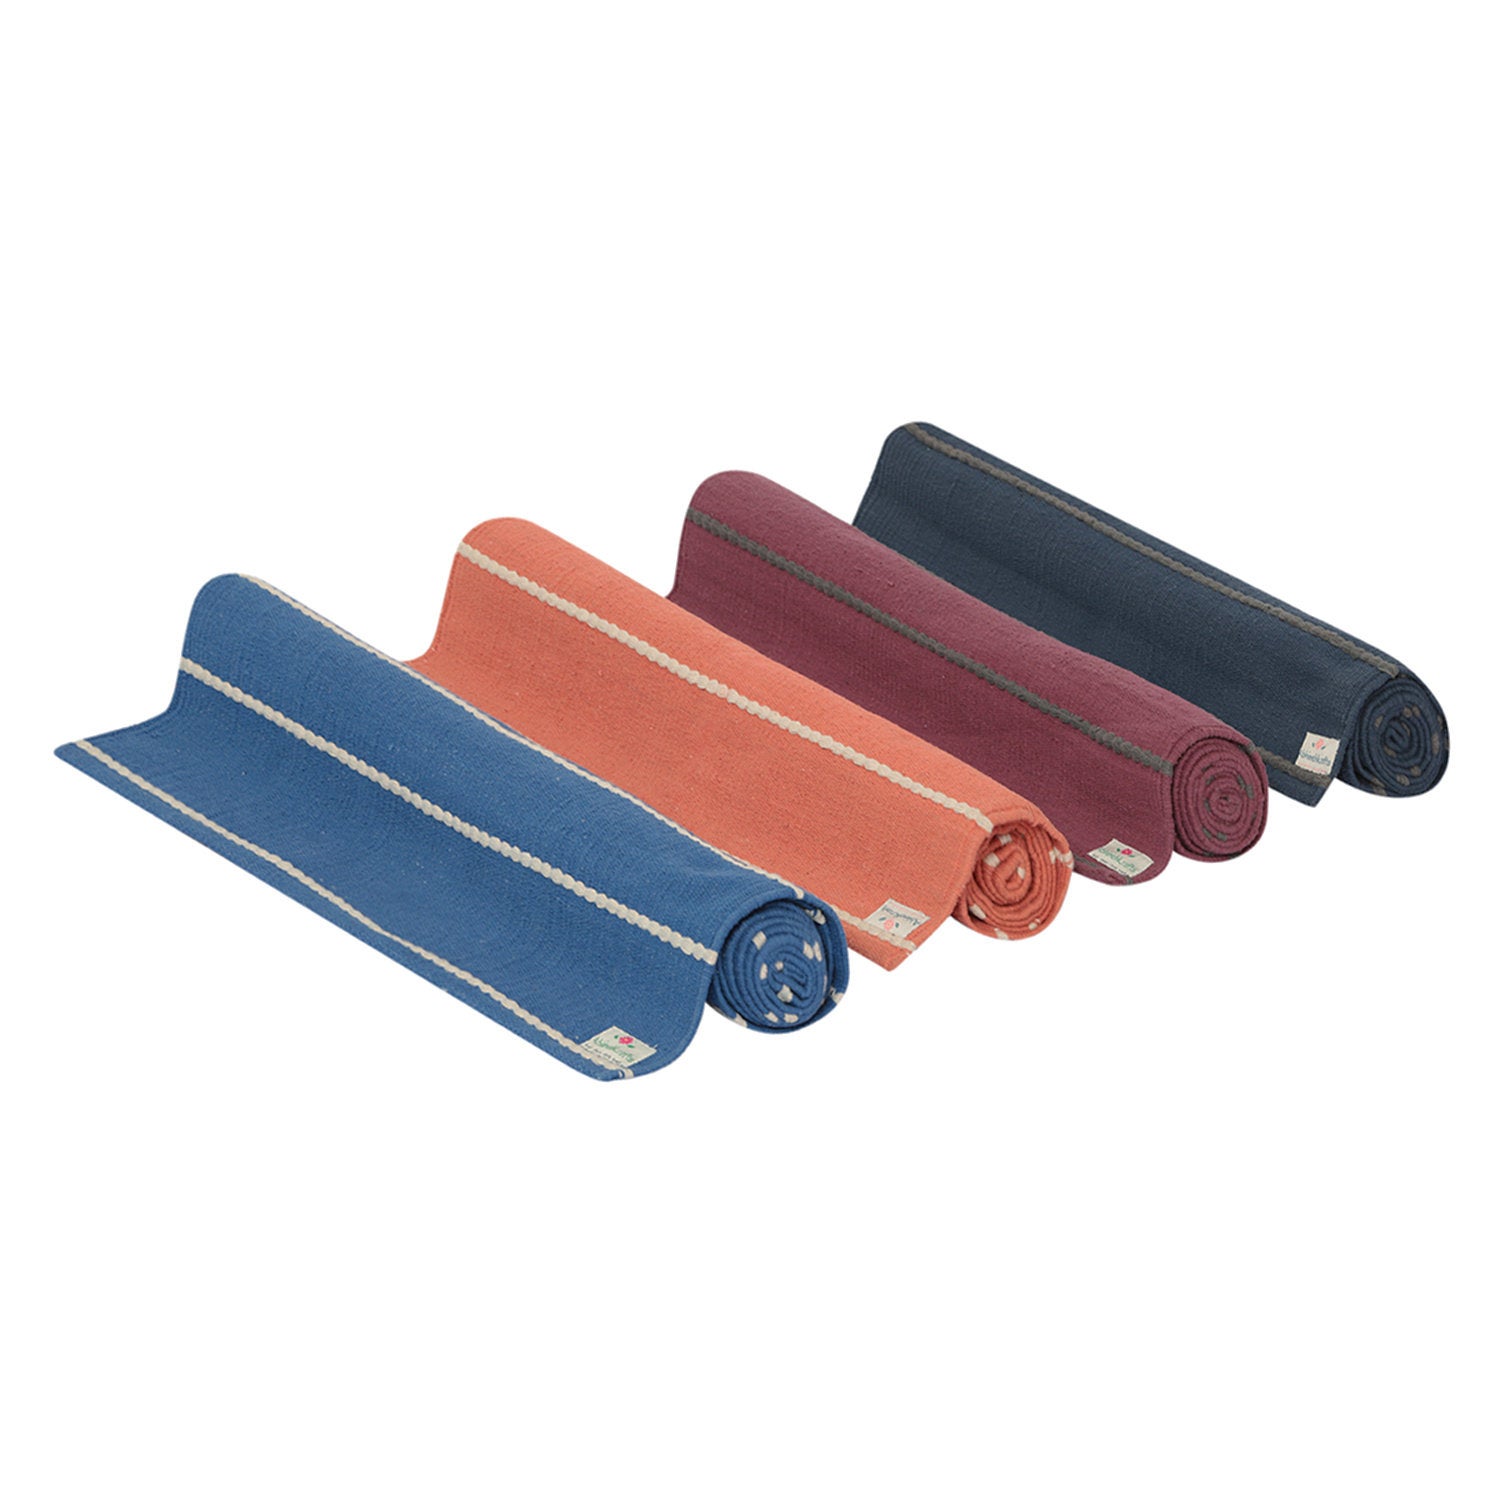 Buy Thick Yoga Mats Online In India -  India